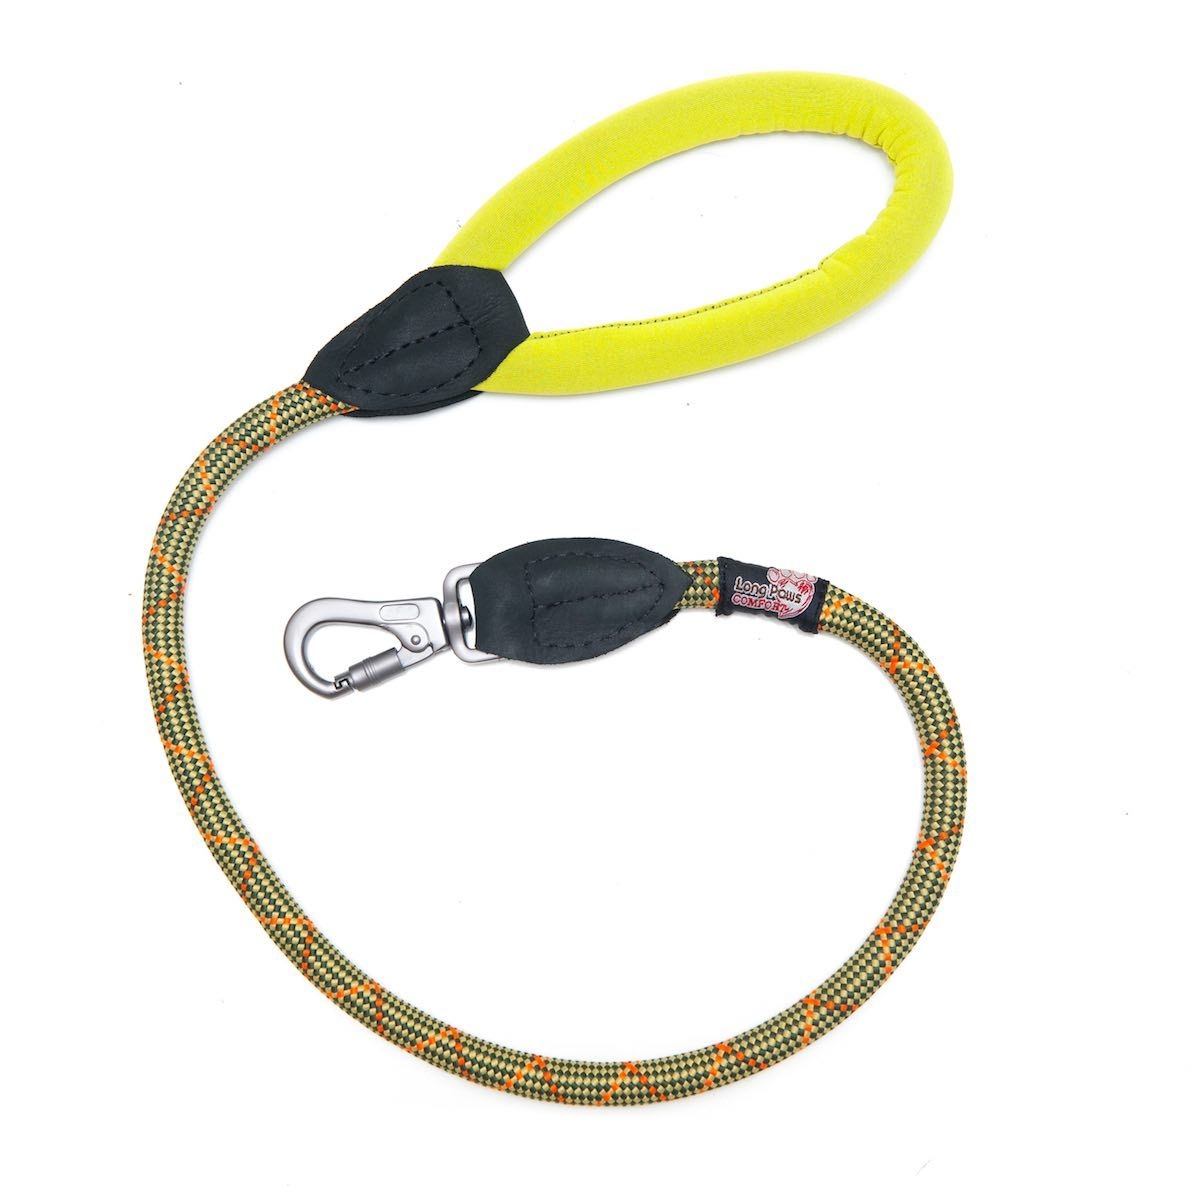 Comfort Padded Rope Leash (Mark 1) – Locking Clip – Dog Lead 75cm – 30in – Green – Unisex – Long Paws